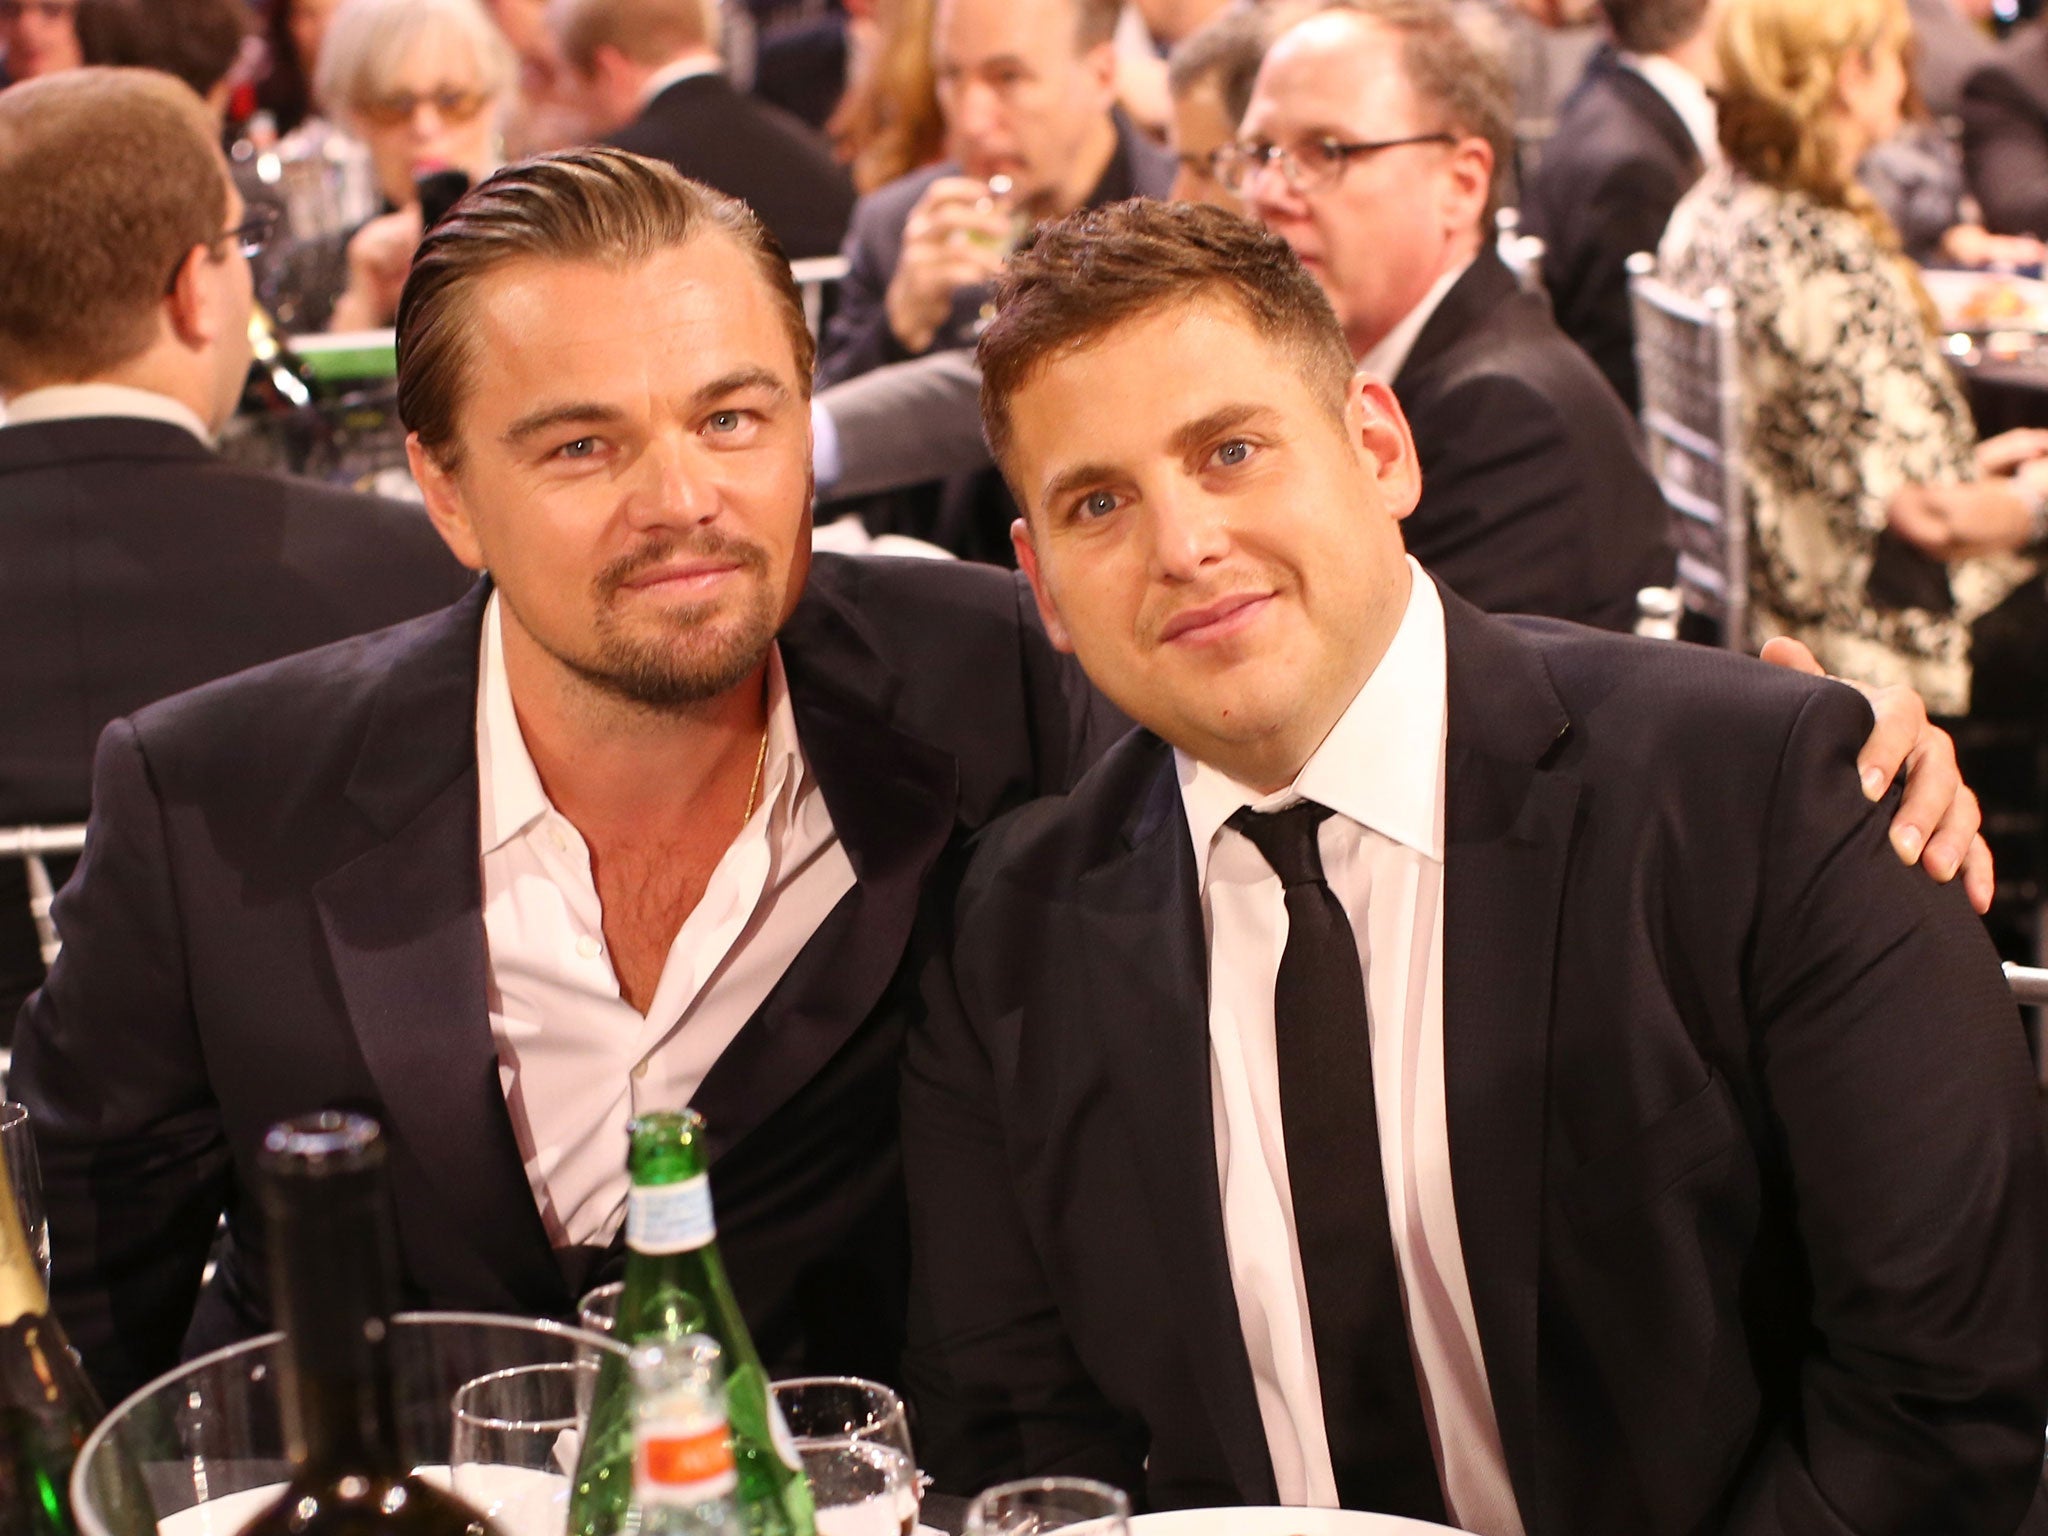 Leonardo DiCaprio and Jonah Hill, pictured here at the Critics Choice Movie Awards in January, are set to star in a film penned by Captain Phillips writer Billy Ray